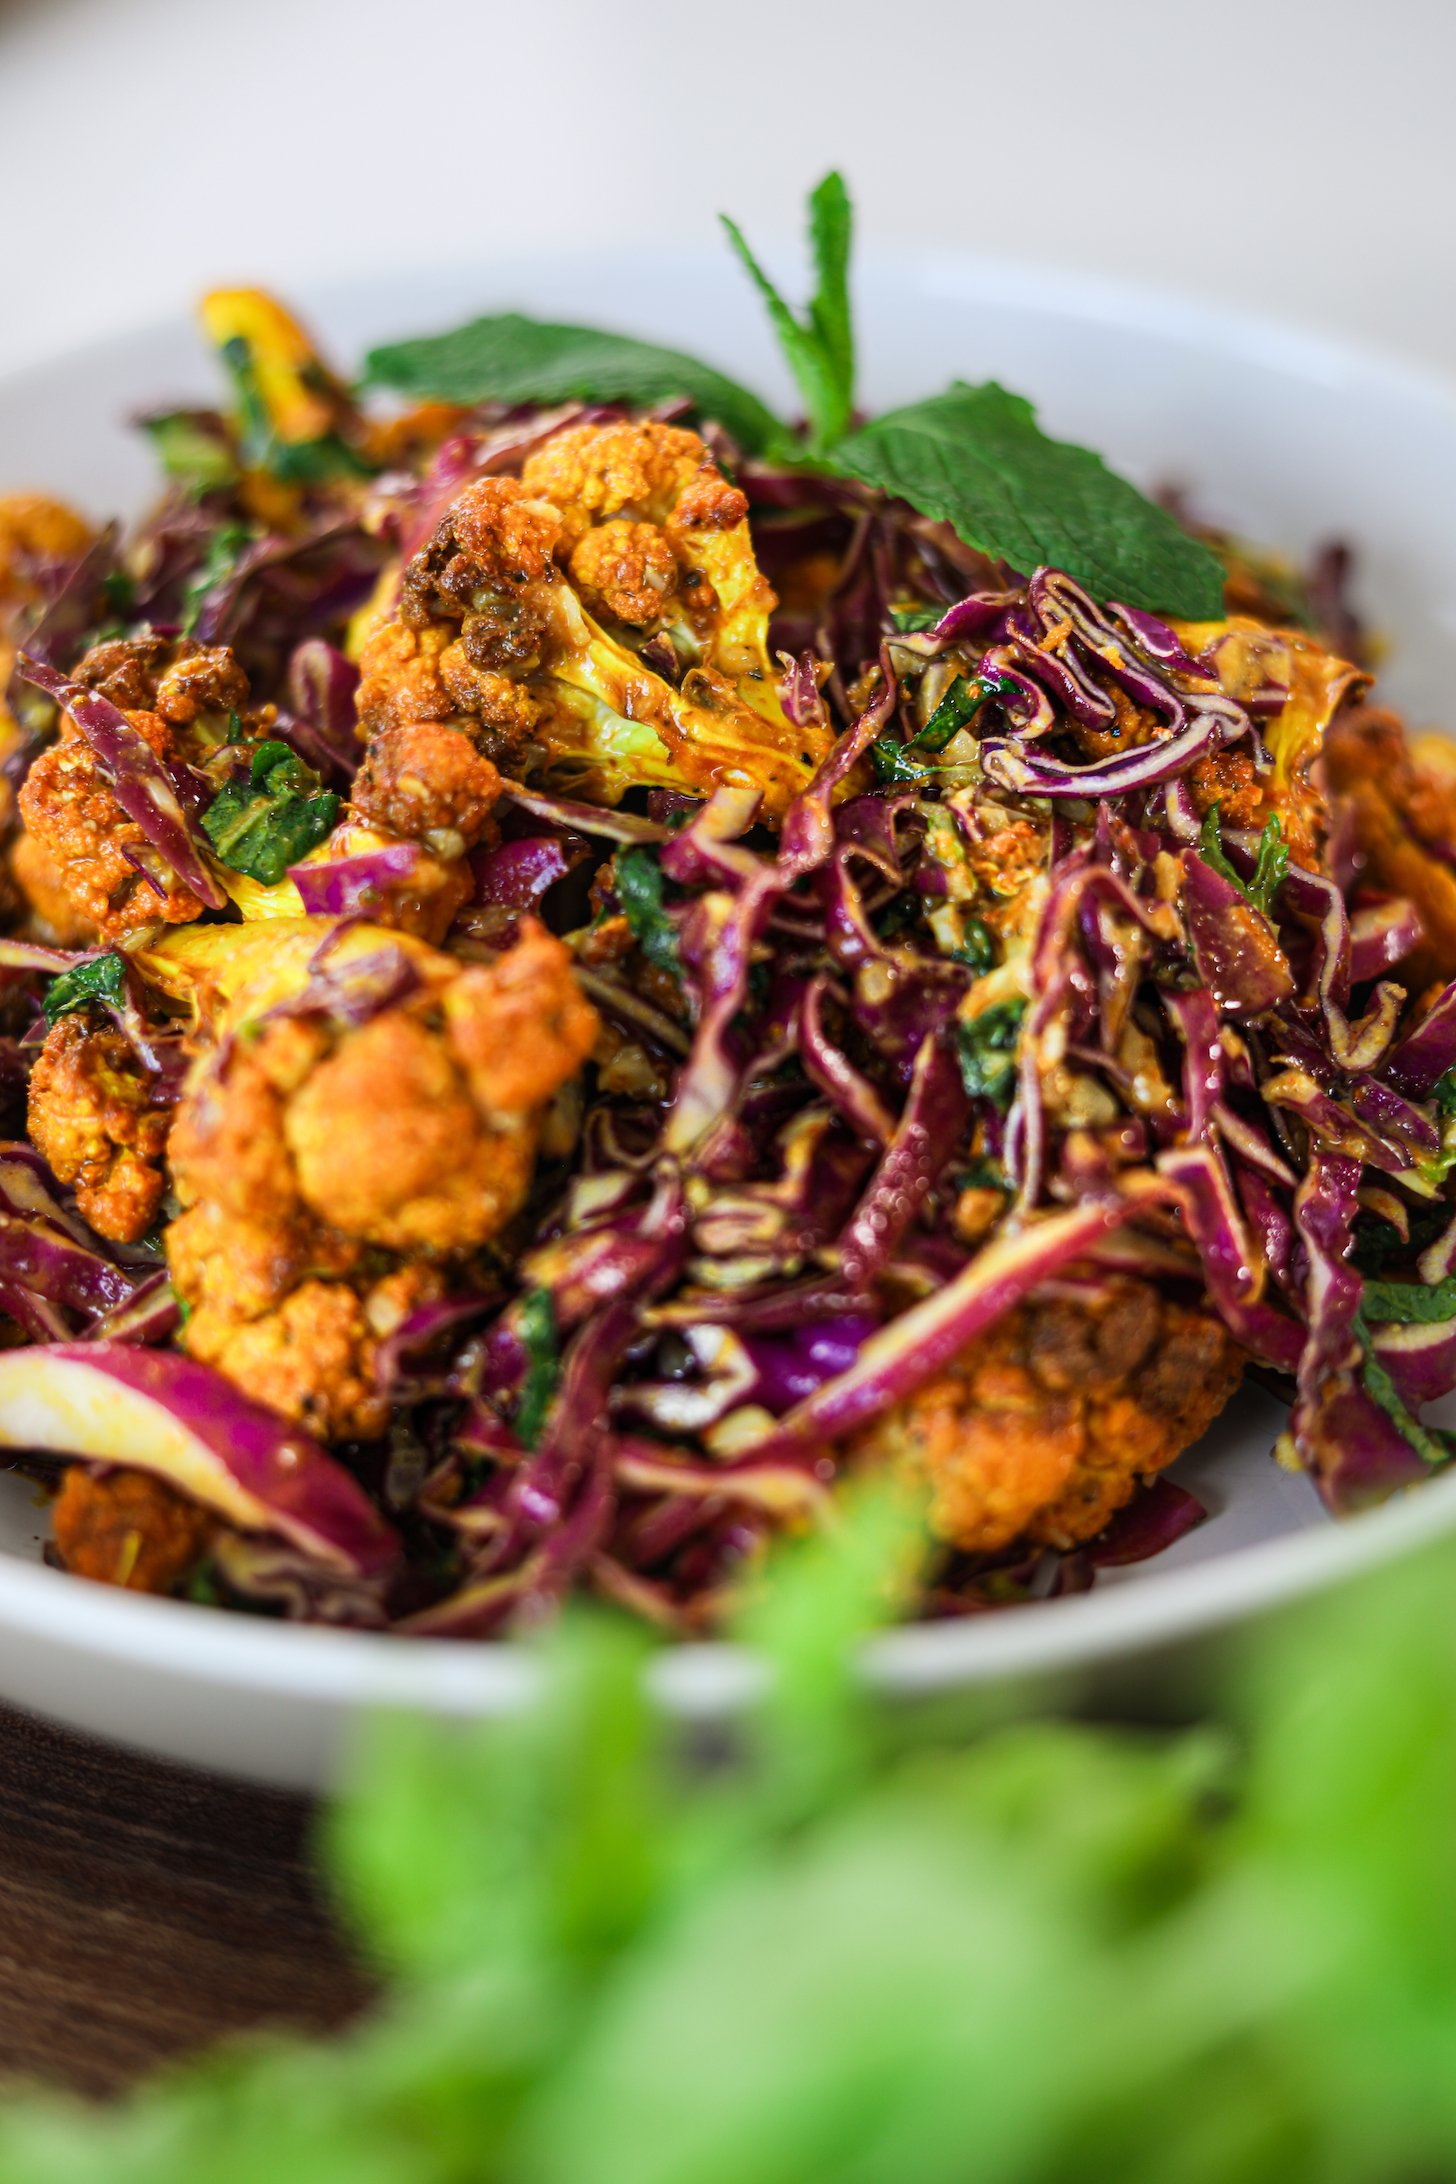 Perspective image of a bowl of spicy cauliflower and shredded red cabbage salad mix topped with a sprig of mint and a green plant in the foreground.